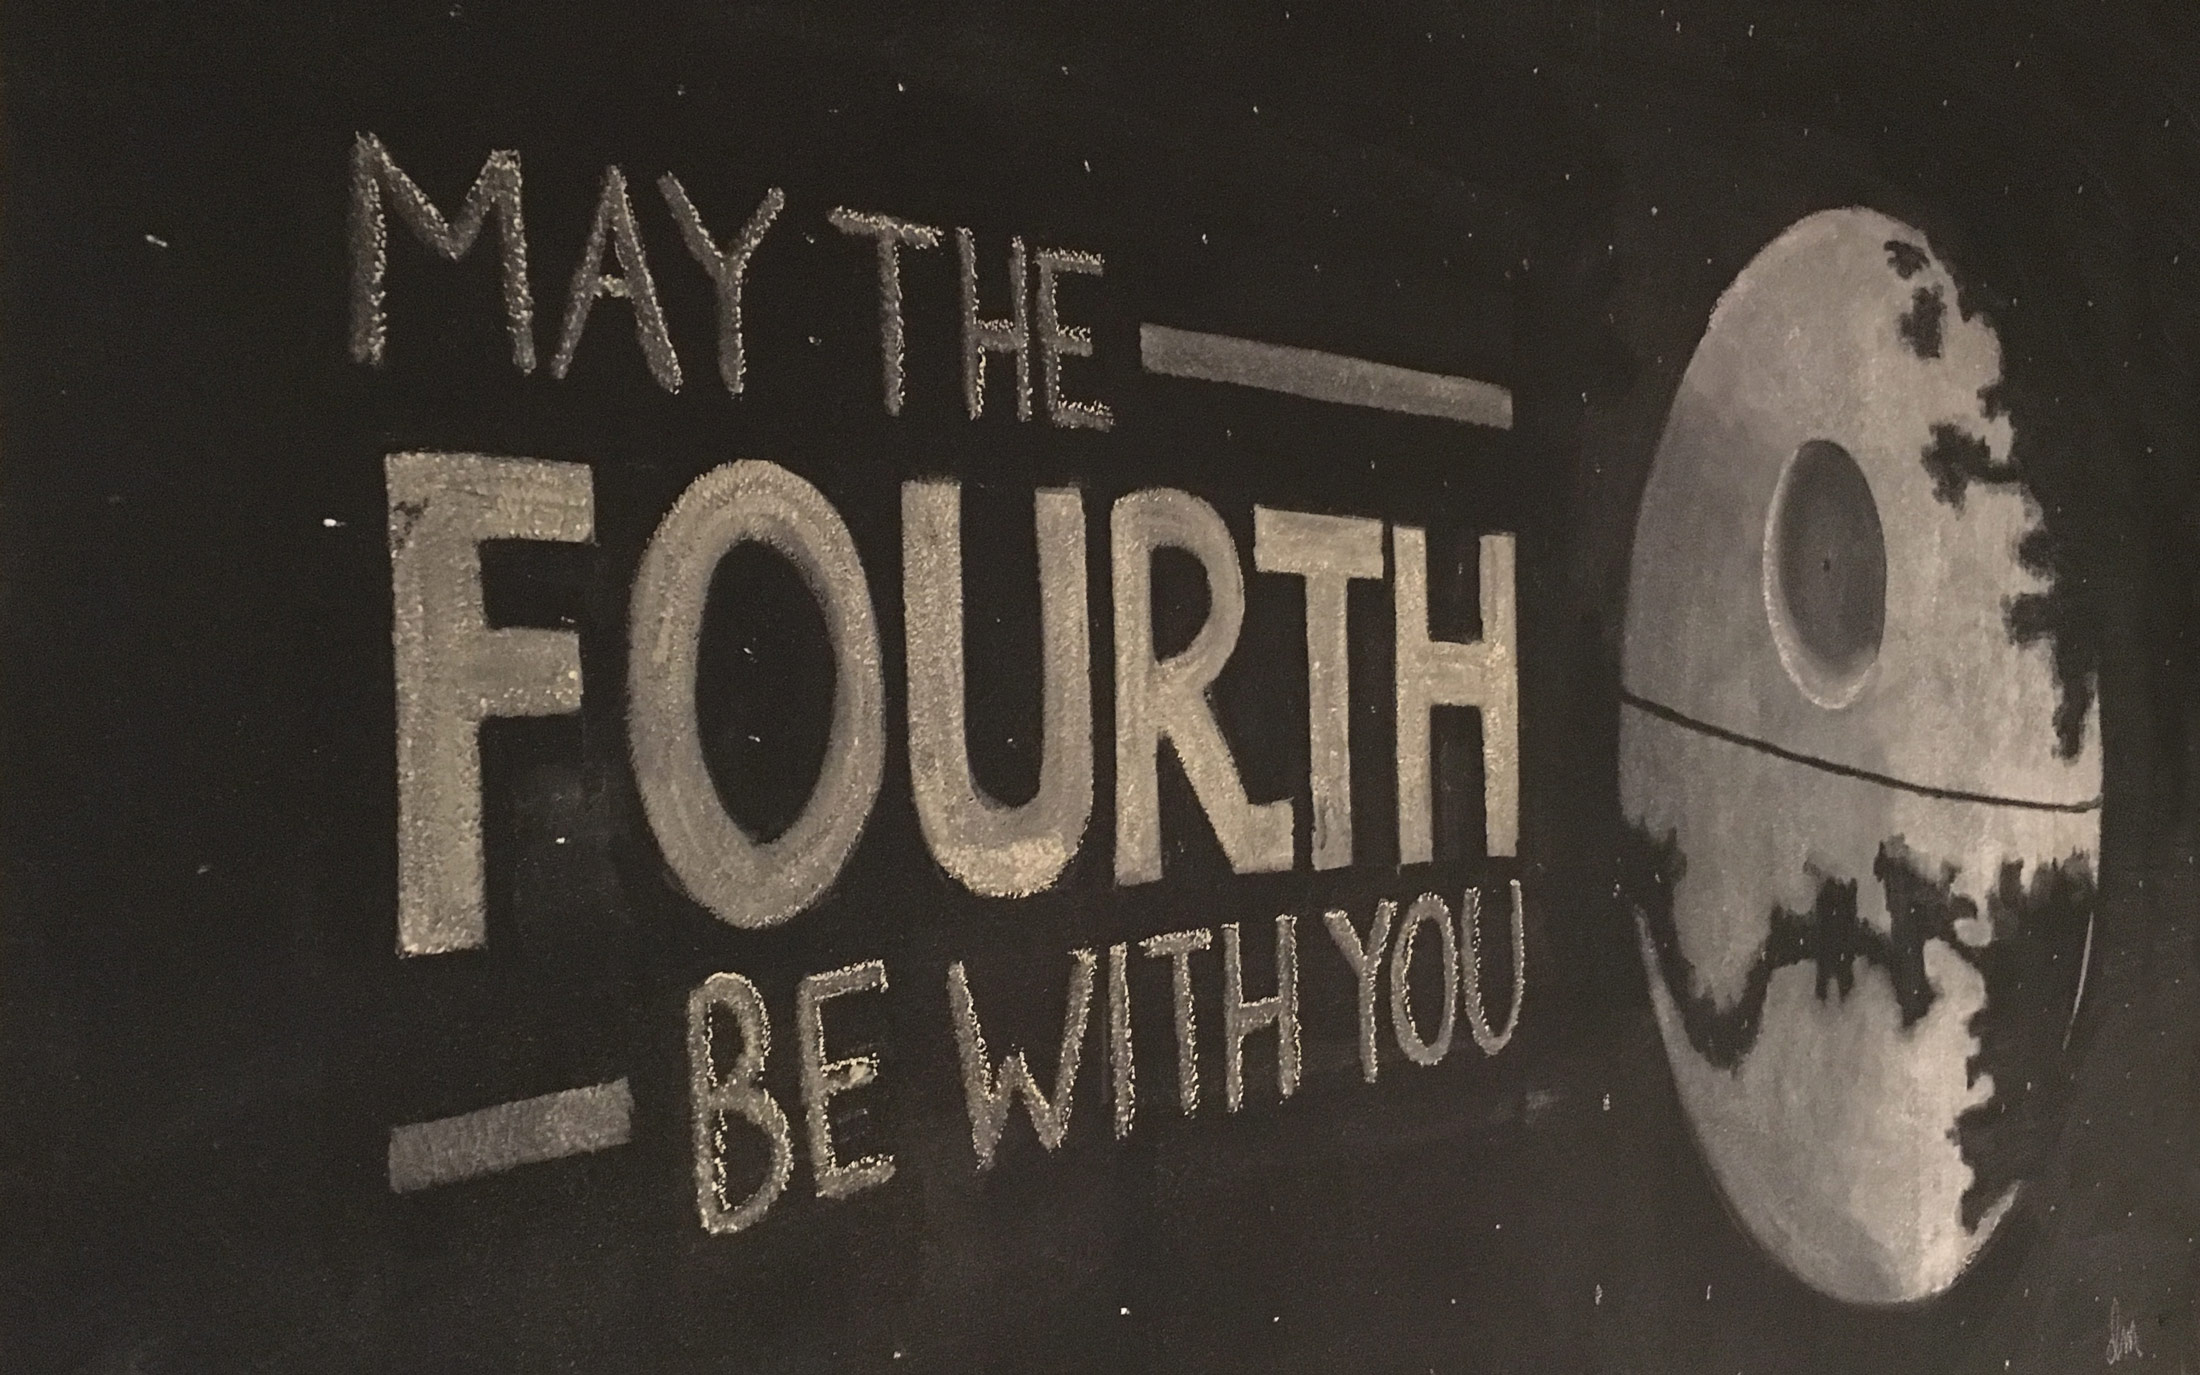 Chalk drawing of the Death Star under construction with the text "May the Fourth Be With You"